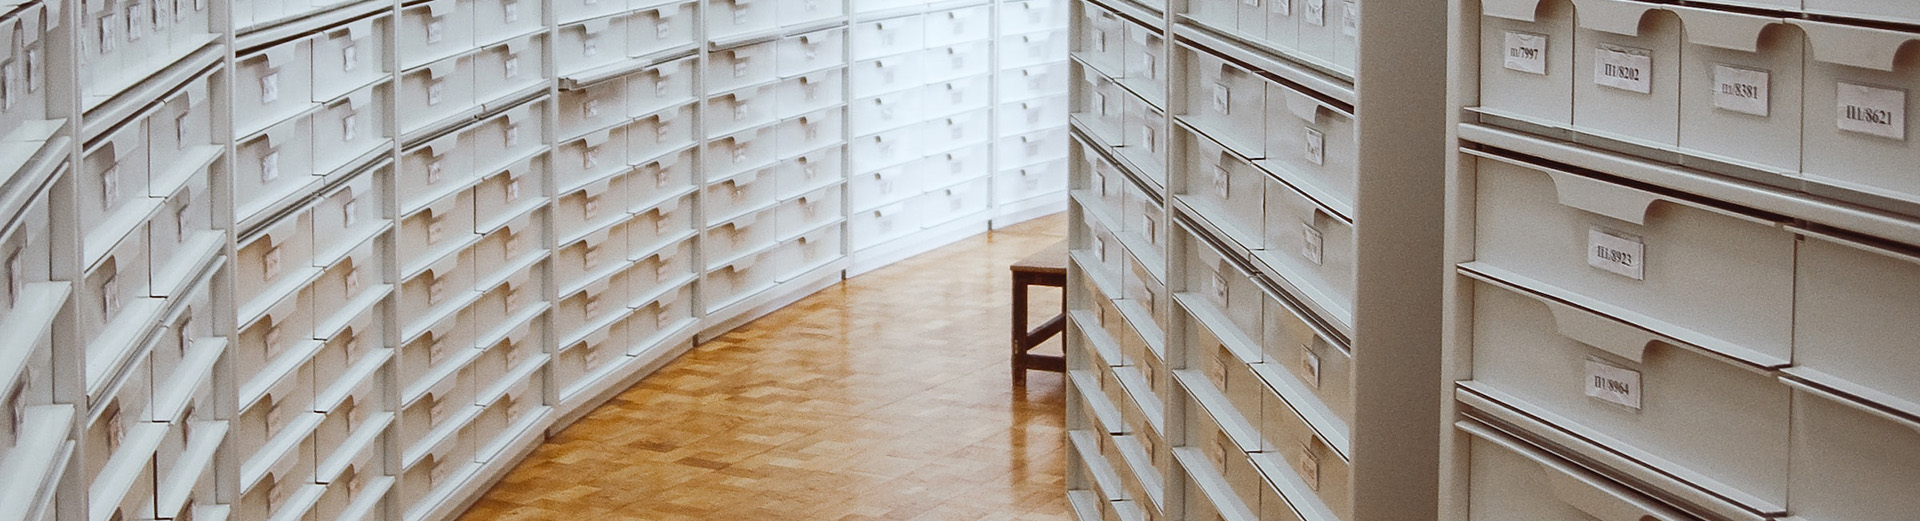 A tidy file room, gracefully curving to the right. Photo by Ula Kuźma on Unsplash.